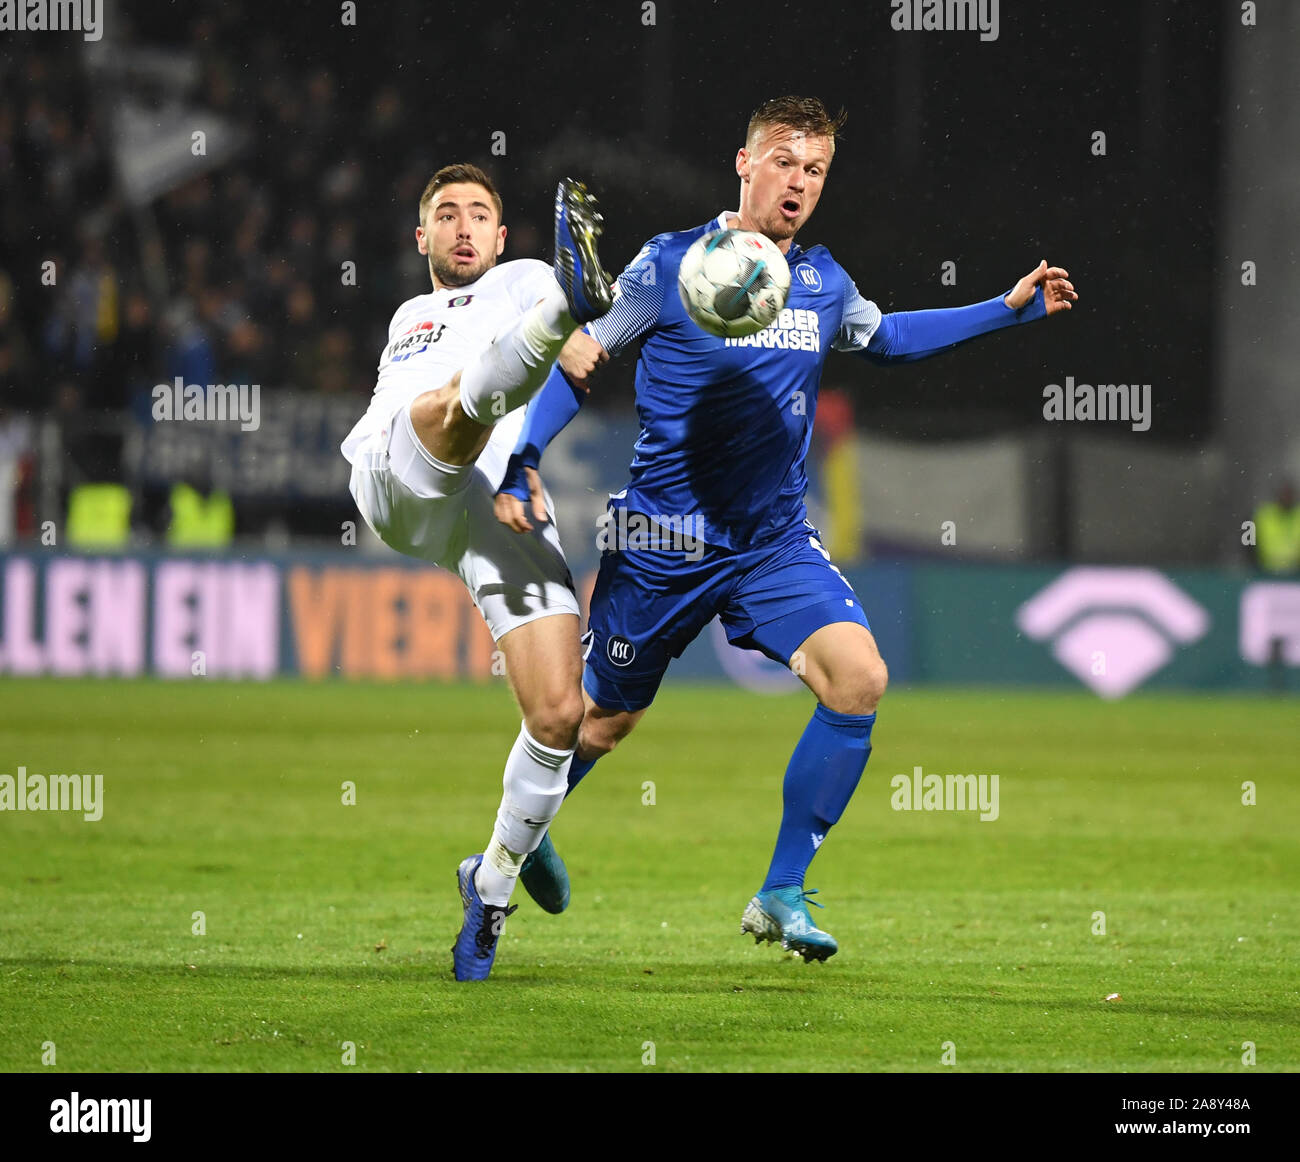 Karlsruhe, Germany. 11th Nov, 2019. Soccer: 2nd Bundesliga, Karlsruher SC - Erzgebirge Aue, 13th matchday in the Wildparkstadion. Marvin Pourie (r) from Karlsruhe and Marko Mihojevic from Auer fight for the ball. Credit: Uli Deck/dpa - IMPORTANT NOTE: In accordance with the requirements of the DFL Deutsche Fußball Liga or the DFB Deutscher Fußball-Bund, it is prohibited to use or have used photographs taken in the stadium and/or the match in the form of sequence images and/or video-like photo sequences./dpa/Alamy Live News Stock Photo